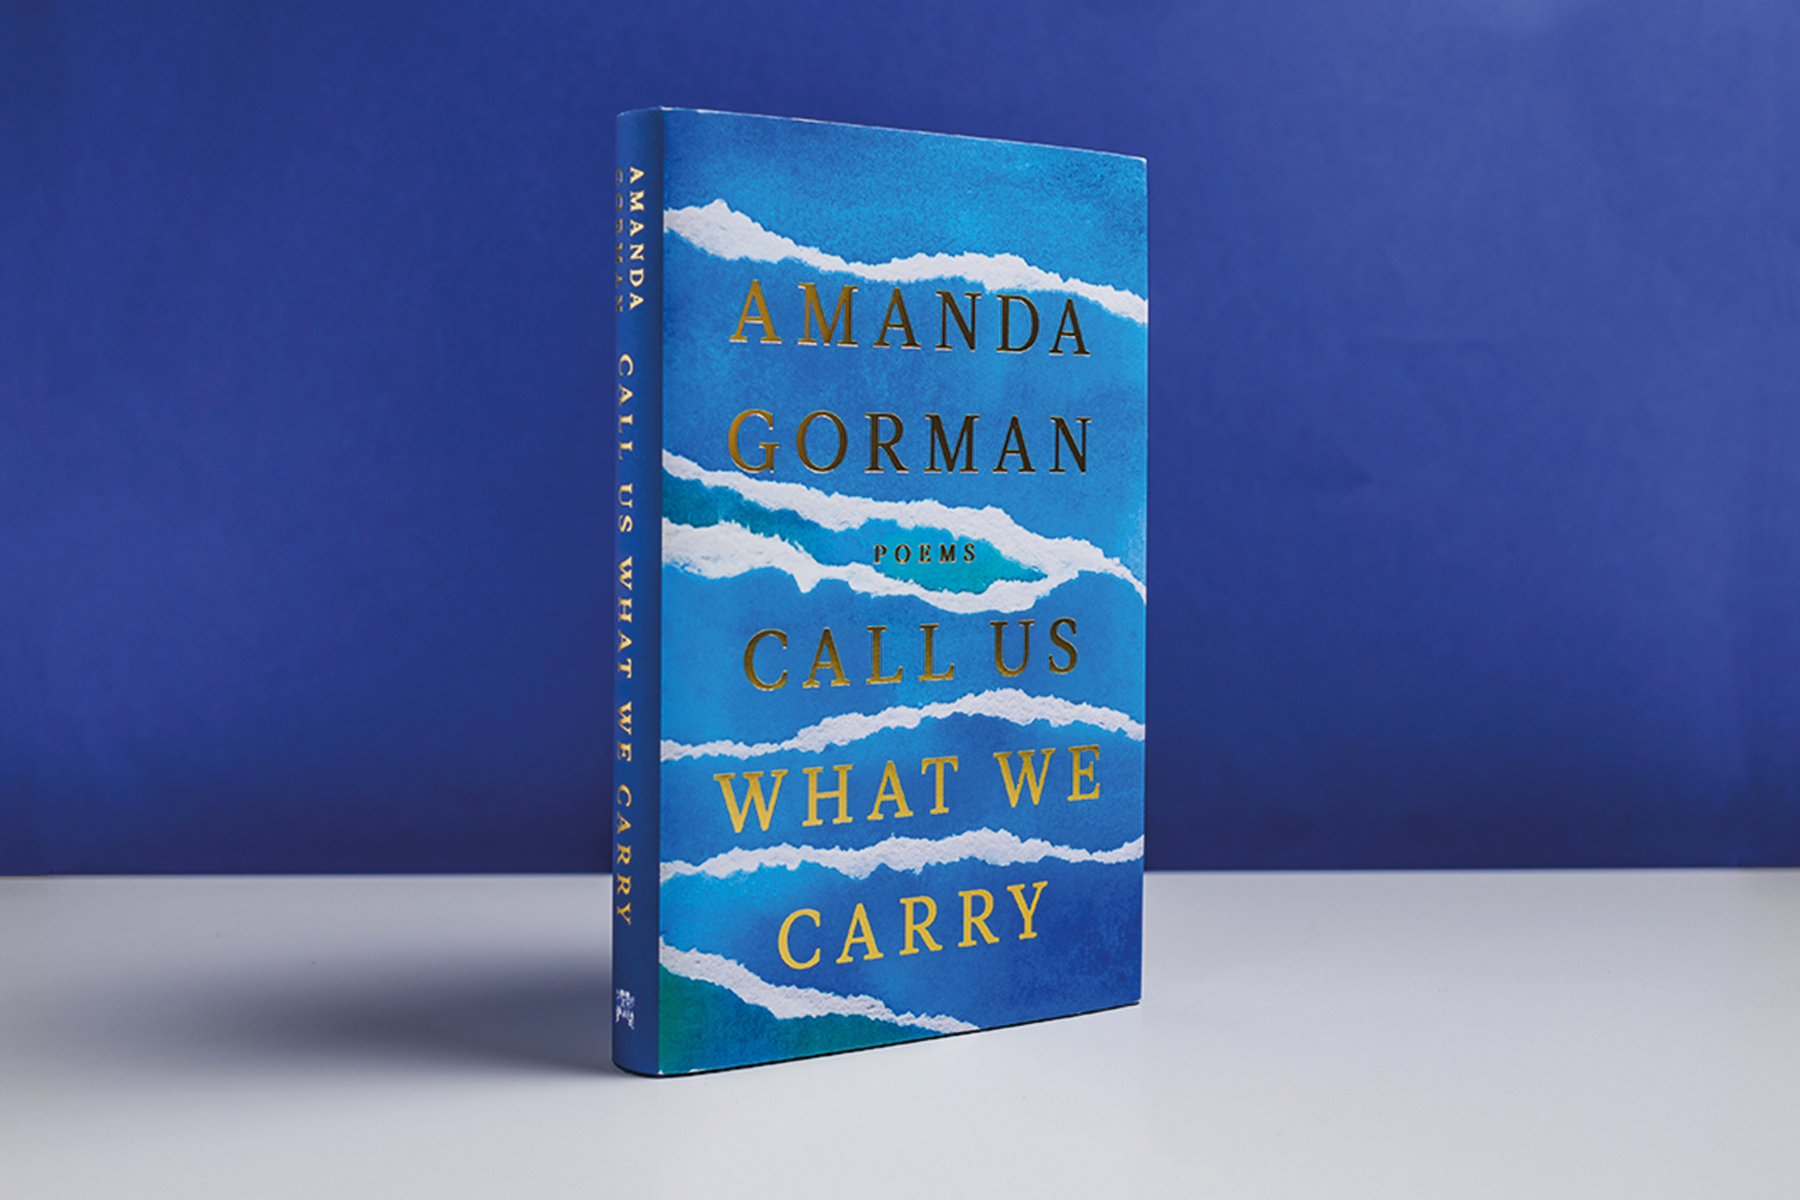 A photo of Amanda Gorman's poetry collection, Call Us What We Carry, against a navy blue background with a gold signature overlaid.